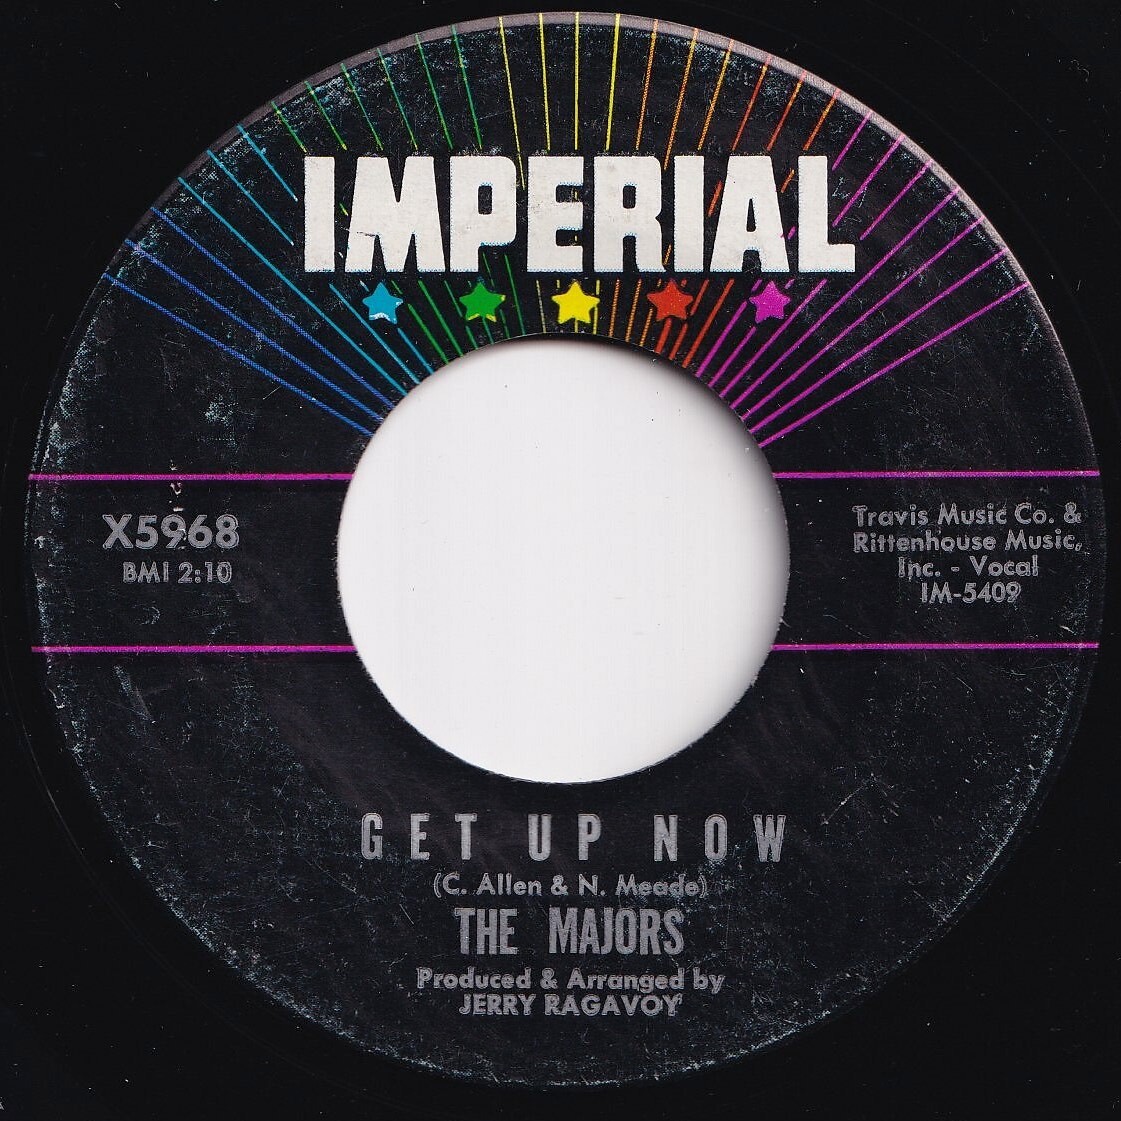 Majors Get Up Now / One Happy Ending Imperial US X5968 206168 R&B R&R レコード 7インチ 45_画像1